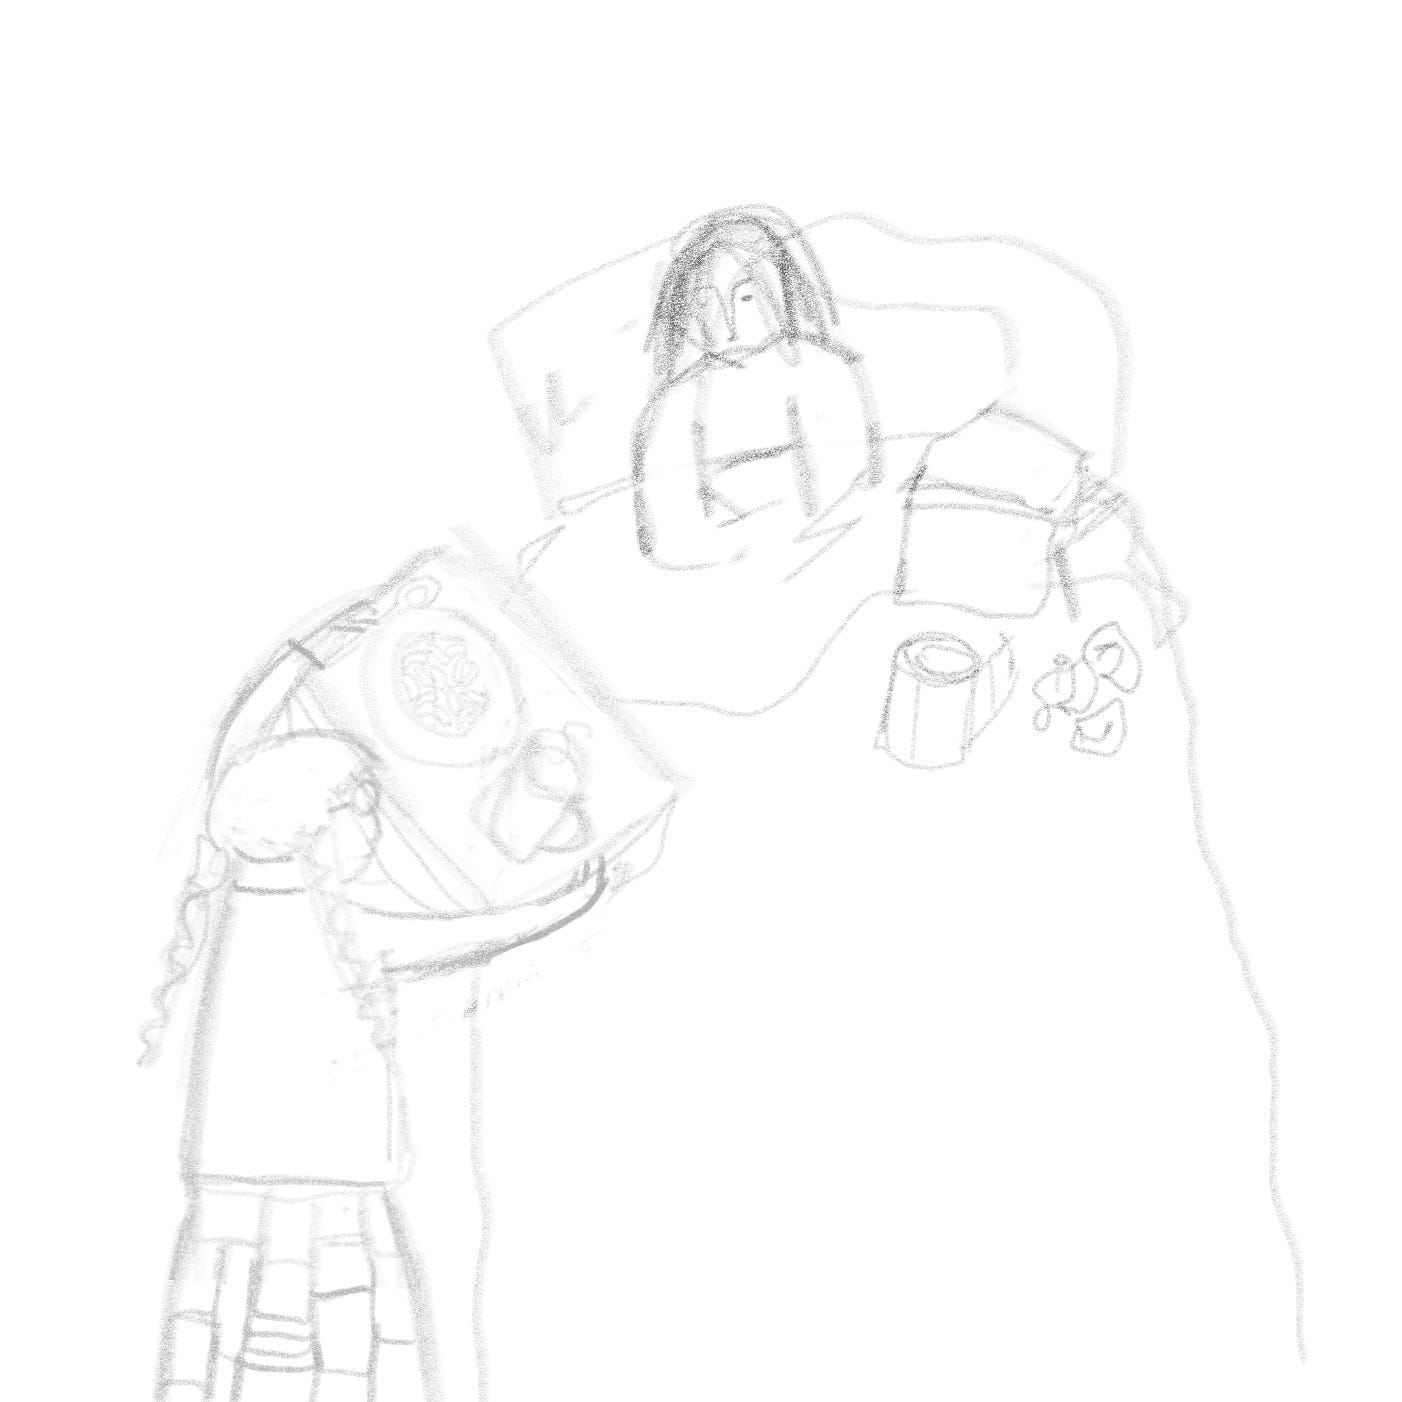 Rough pencil sketch of someone in bed ill with dirty tissues and a roll of toilet roll and an upside down book, with a mother, wearing a patchwork skirt and plaits and glasses, carrying a tray with macaroni cheese and hot sweet tea on. 